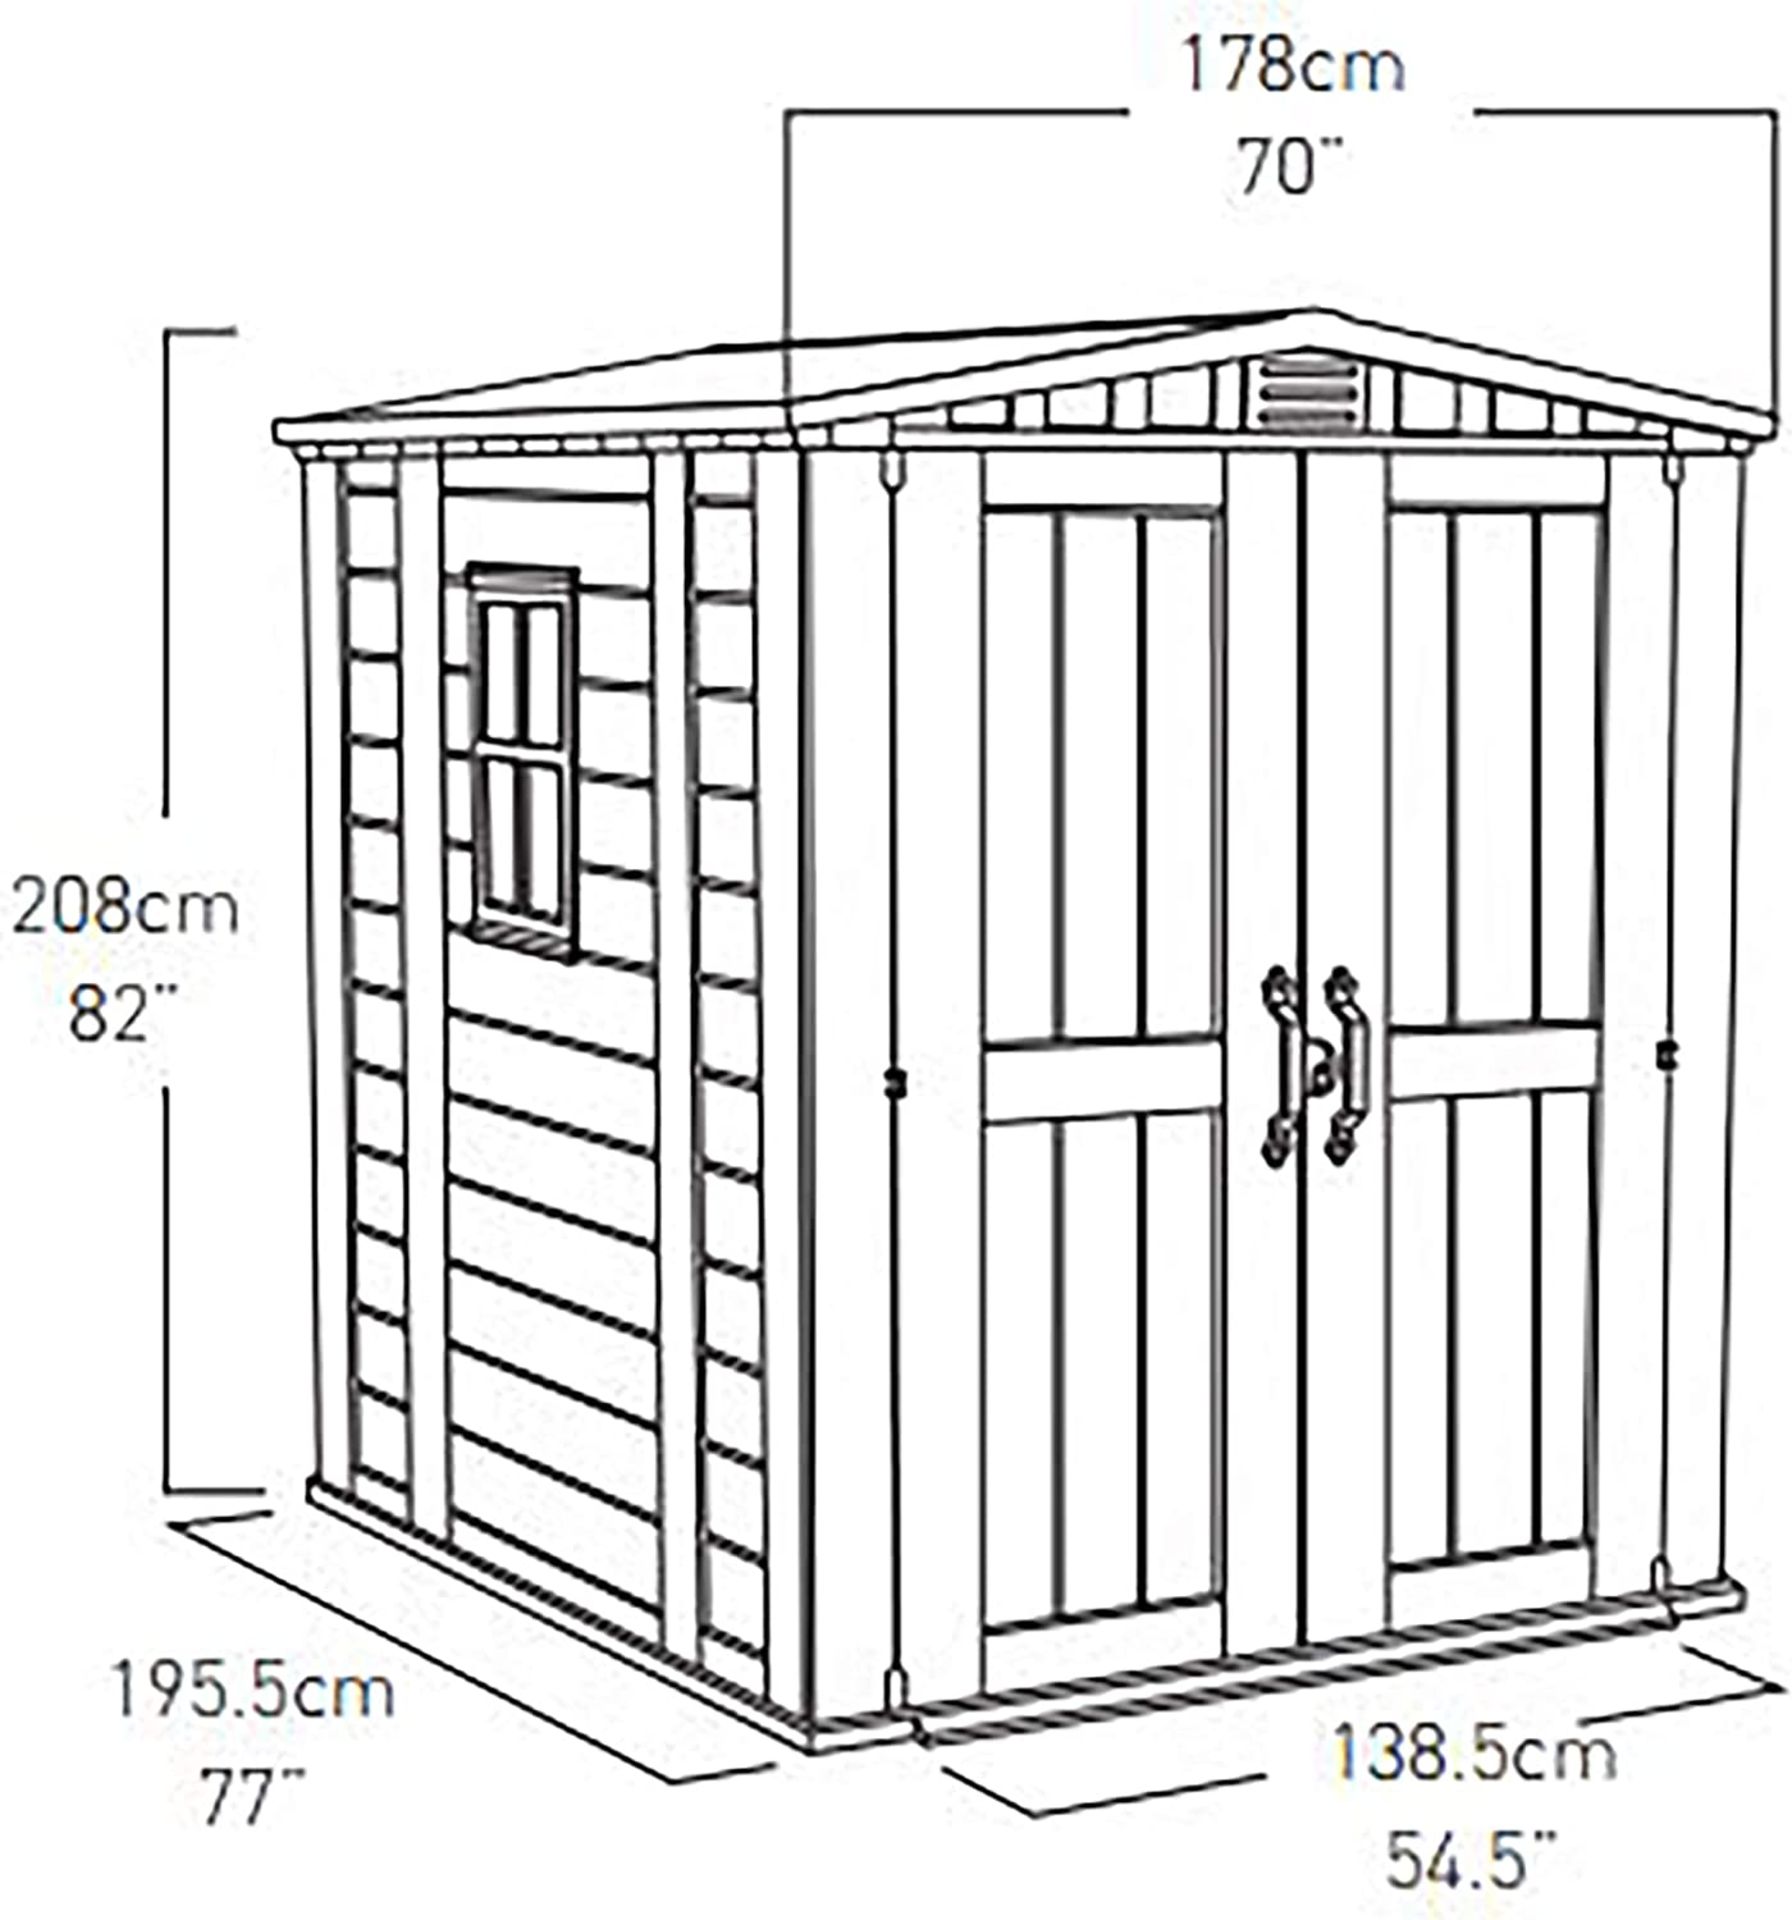 New Keter Factor Garden Plastic Shed. Dimensions: 178 x 195.5 x 208cm (approx.) Material: Resin, - Image 4 of 4